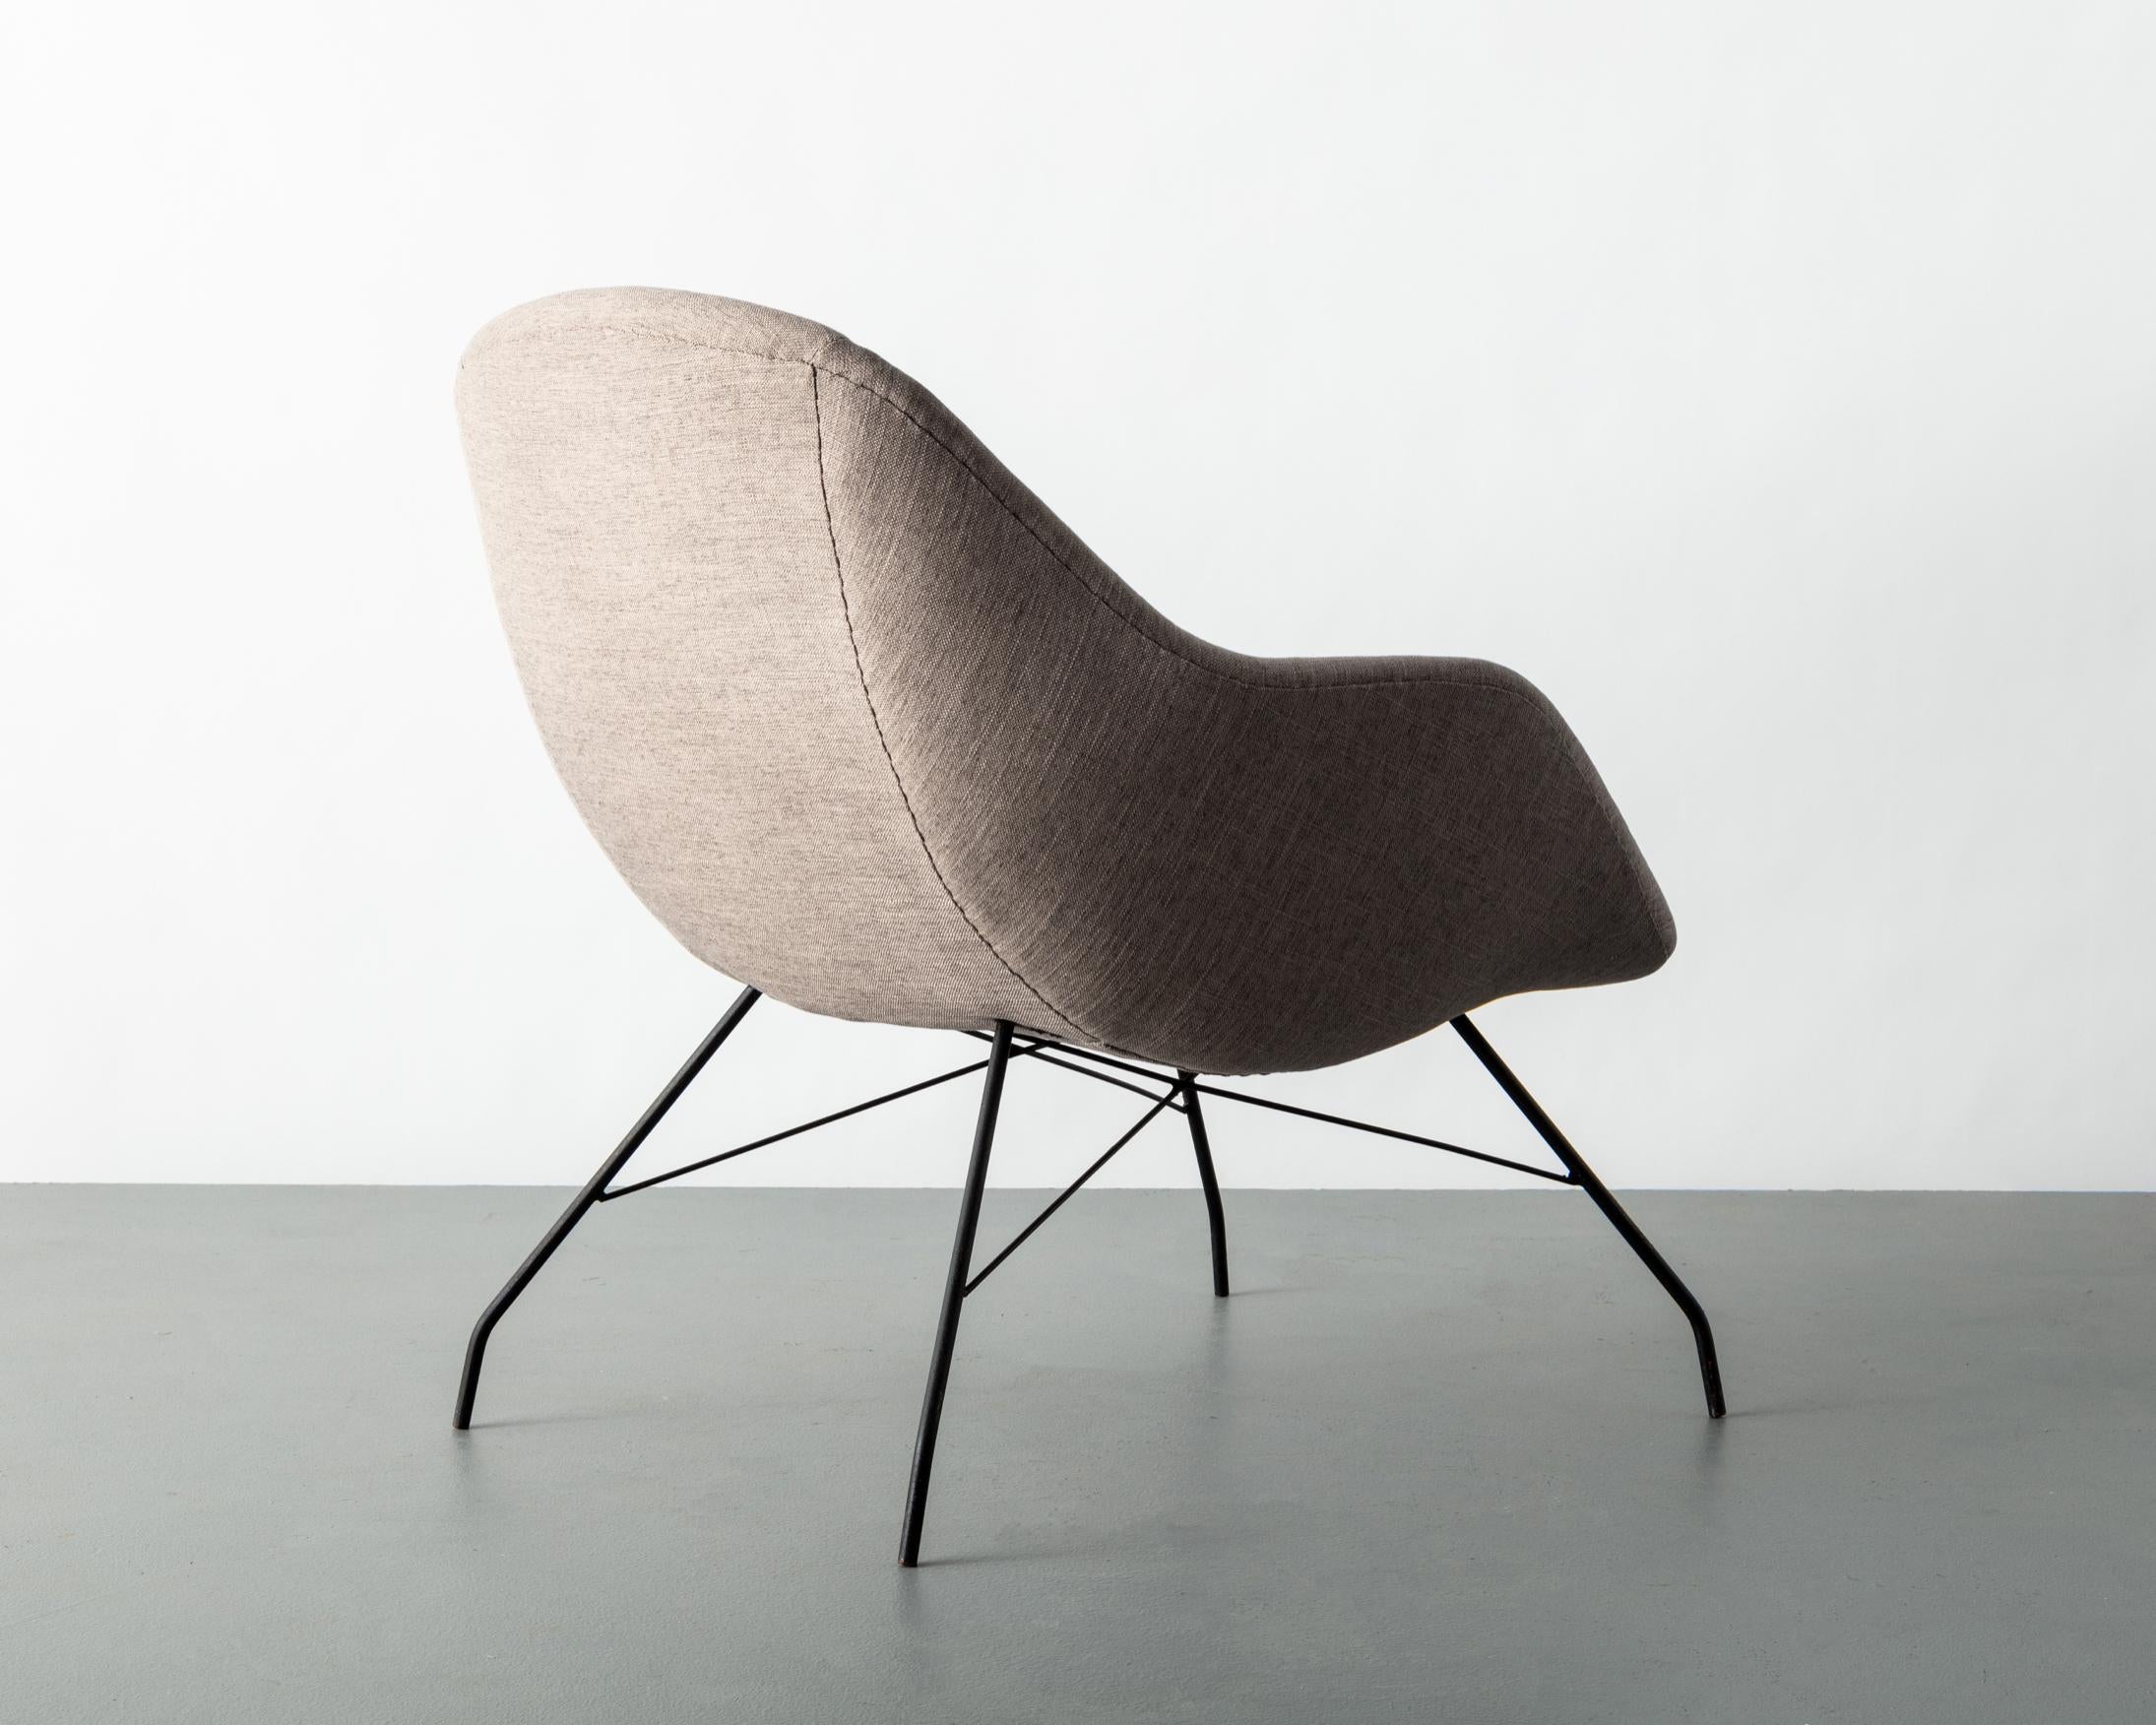 Lounge chair in upholstery with metal frame. Designed by Carlo Hauner for Forma, Brazil, 1960s.